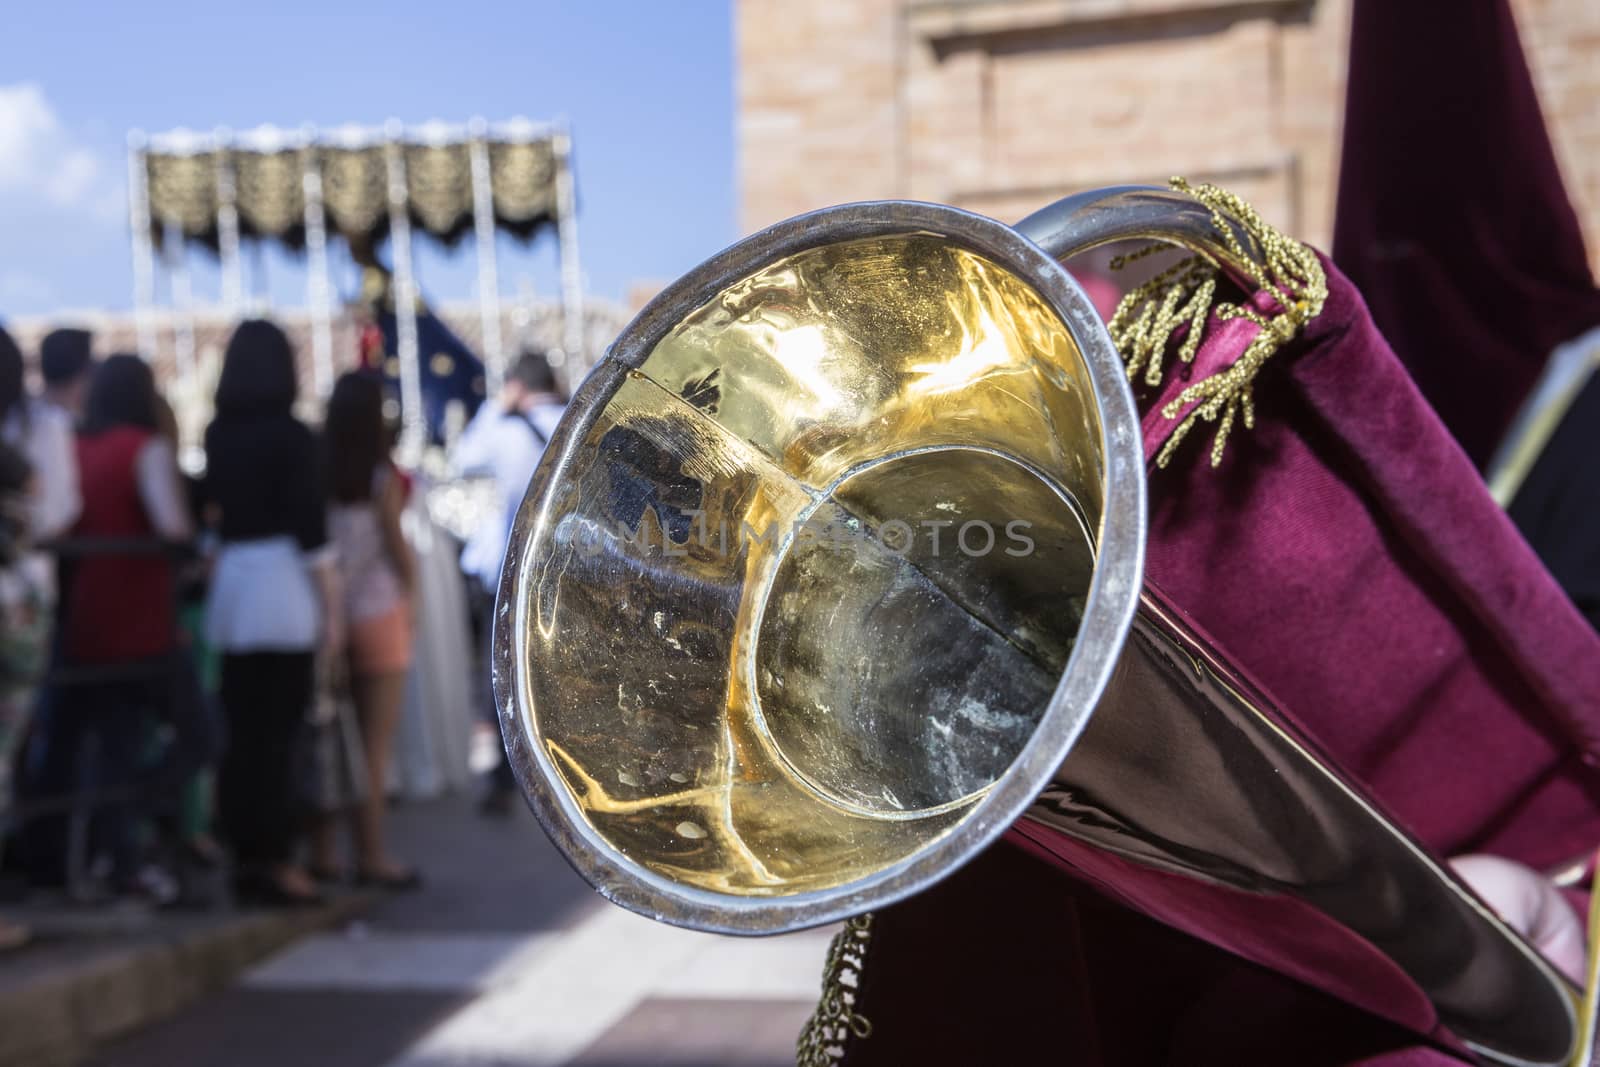 Linares, Jaen province, SPAIN - March 17, 2014: Nuestra Señora de los Dolores going out of the church of Santa Maria, detail of typical elongated trumpet of this brotherhood, taken in Linares, Jaen province, Andalusia, Spain